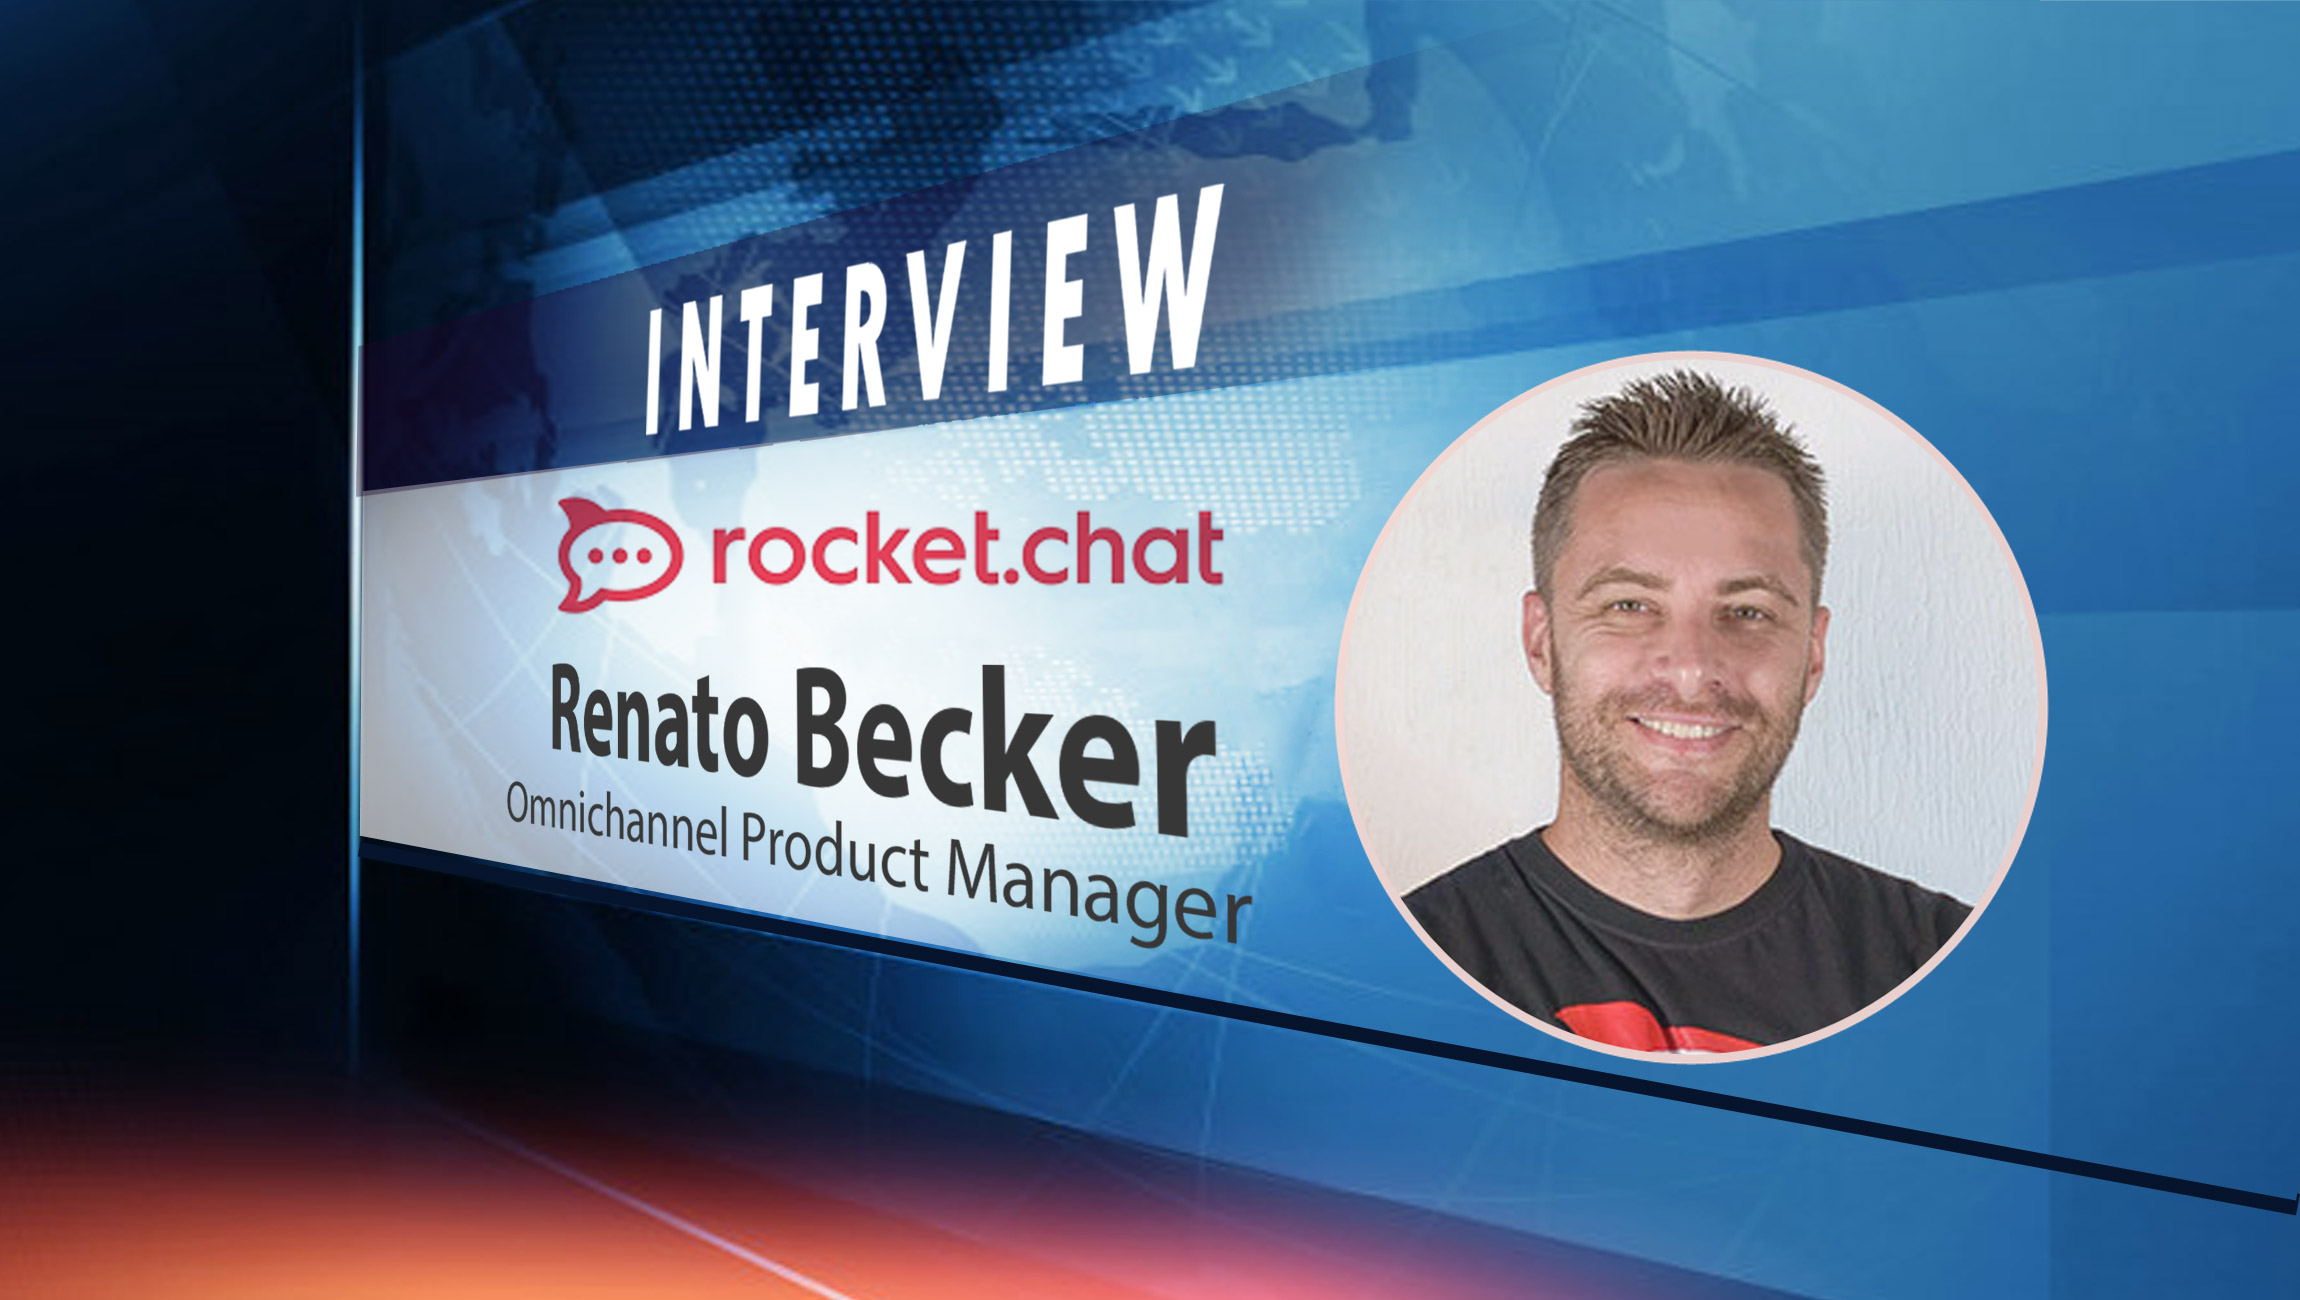 SalesTechStar Interview with Renato Becker, Omnichannel Product Manager at Rocket.Chat